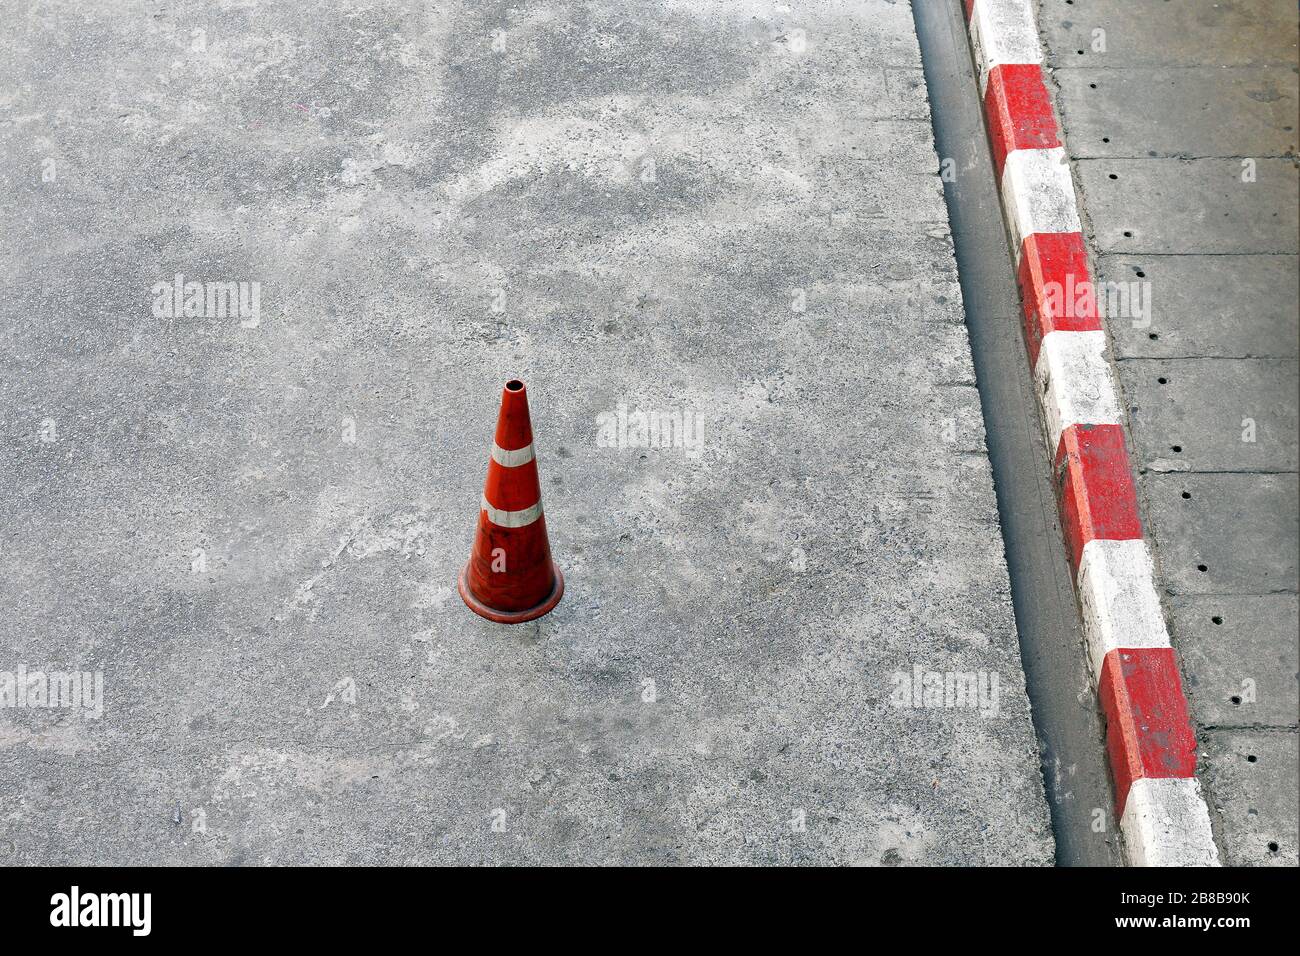 Traffic cones, Cement ground floor and plastic traffic cones red and white stripes is Safety equipment on the road Stock Photo